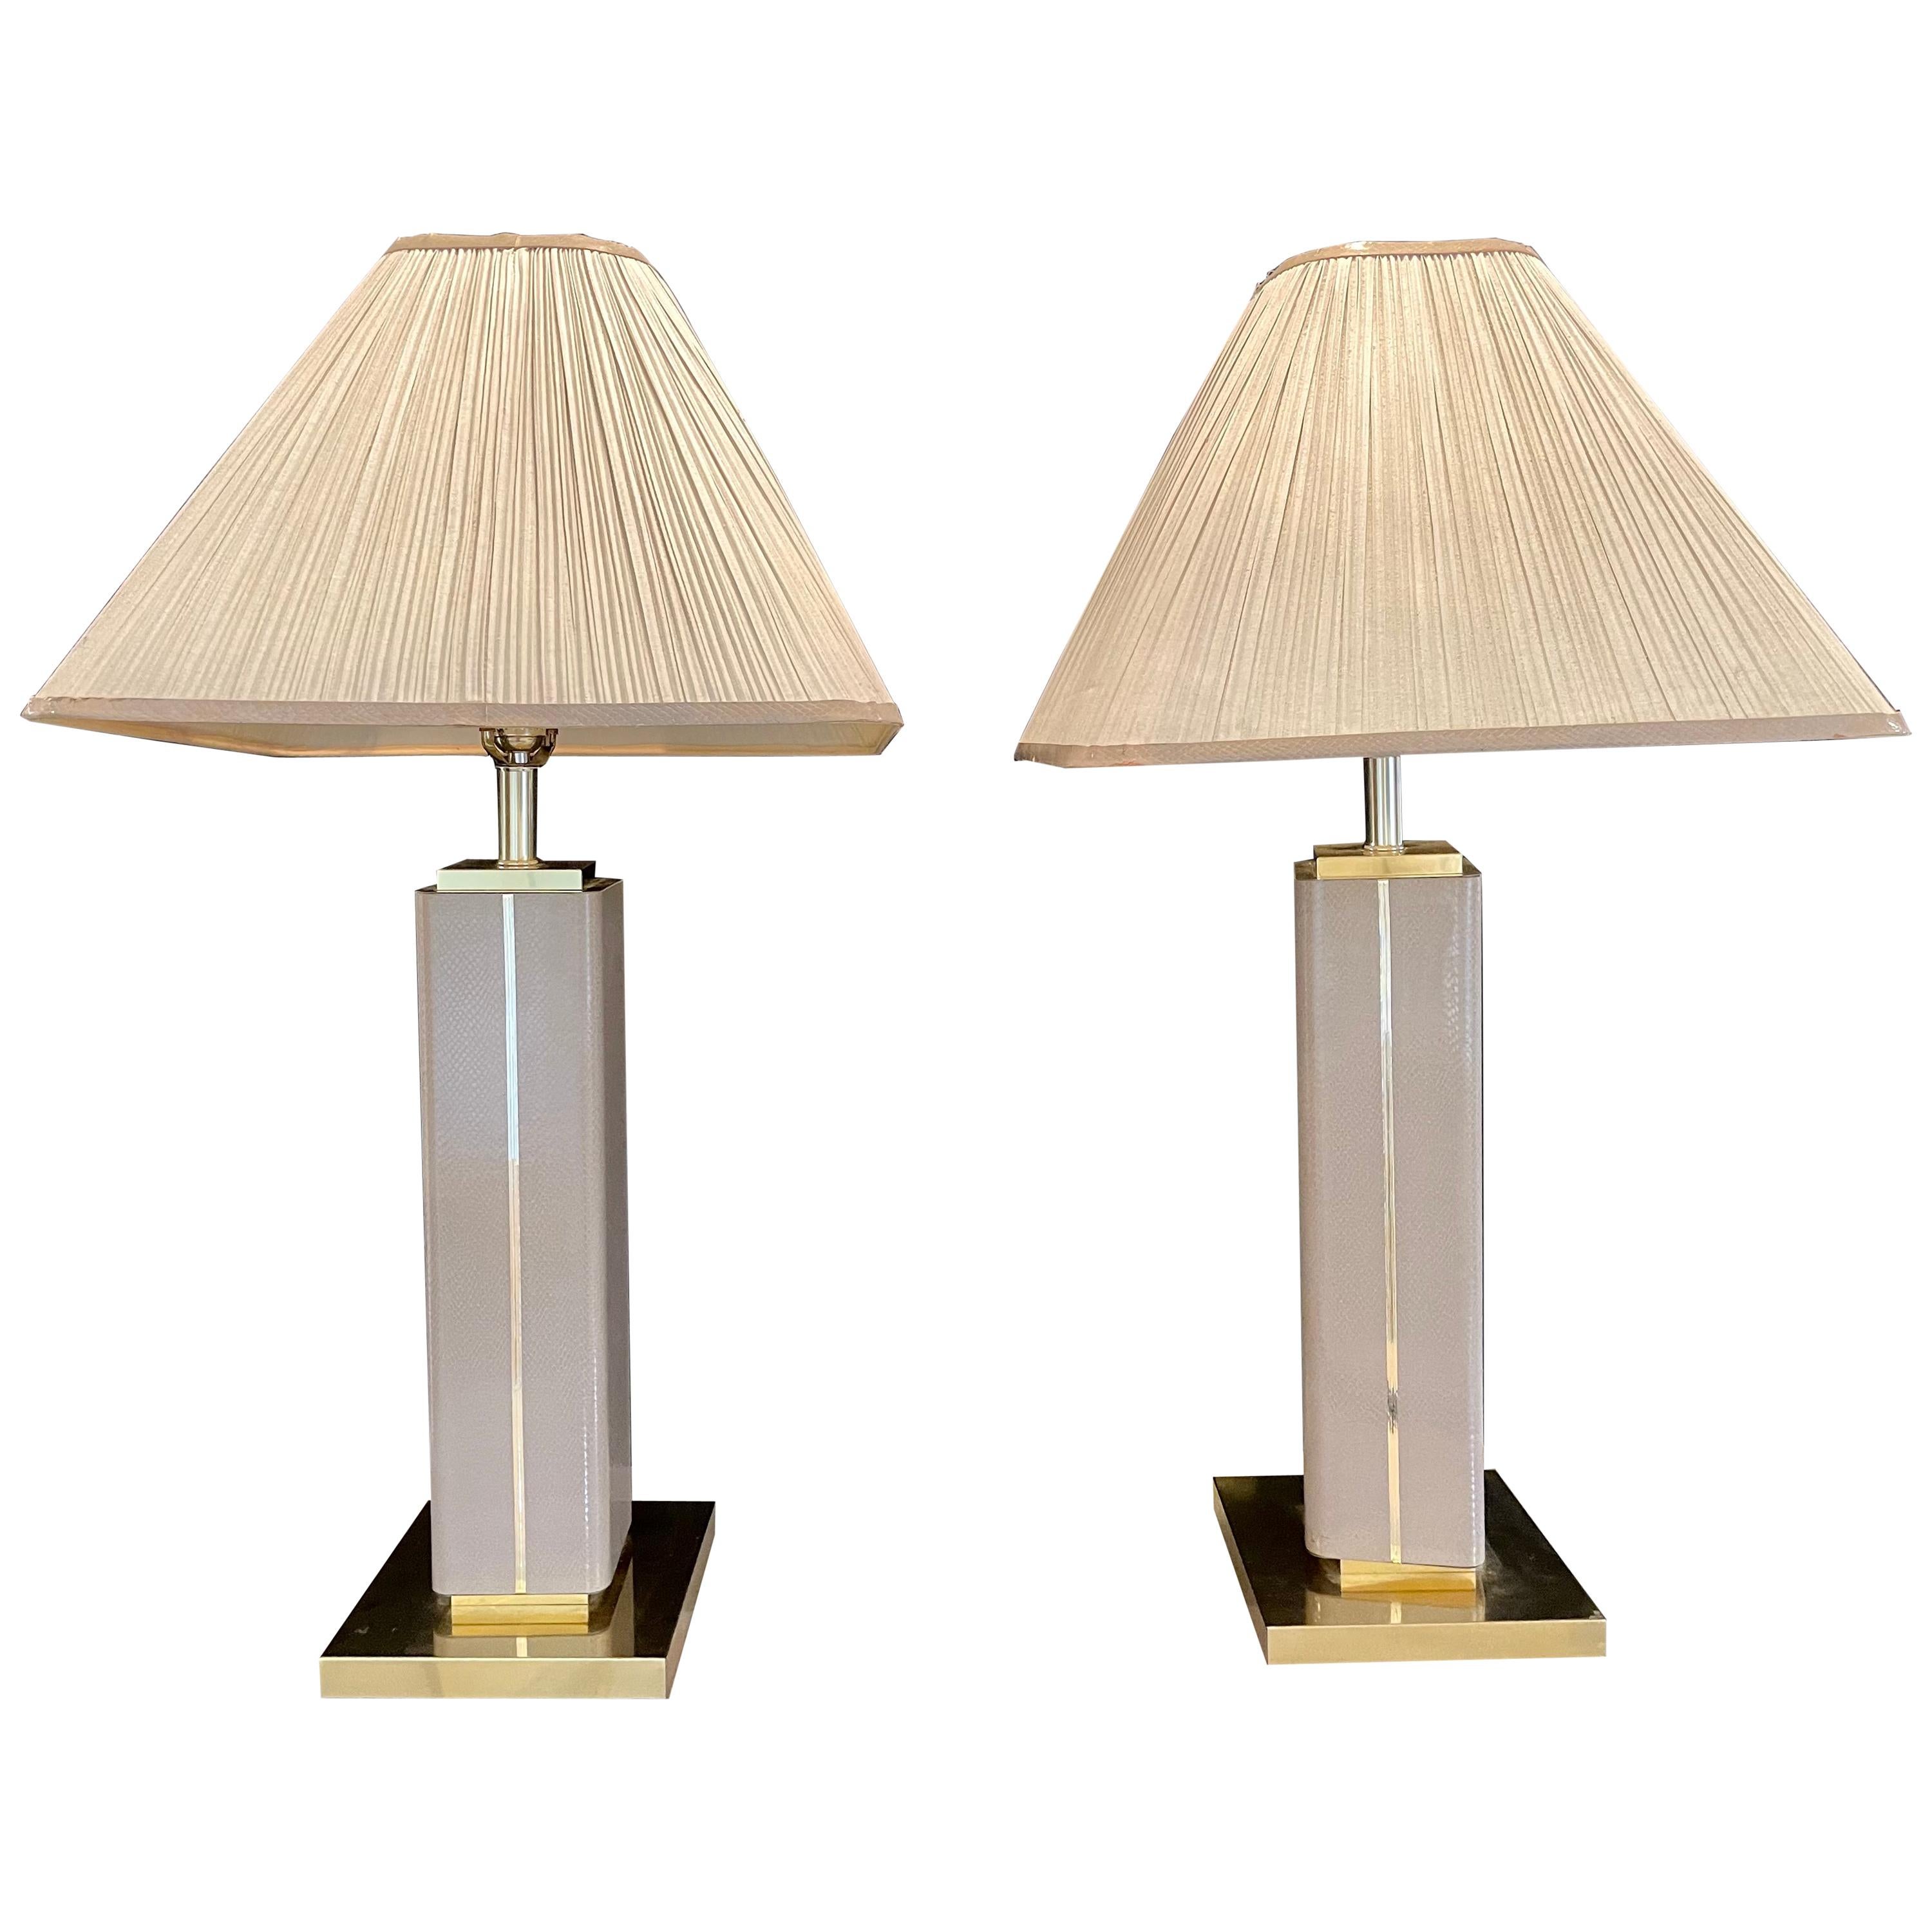 Pair of Leather Wrapped Modern Table Lamps with Custom Shades, Lorin Marsh